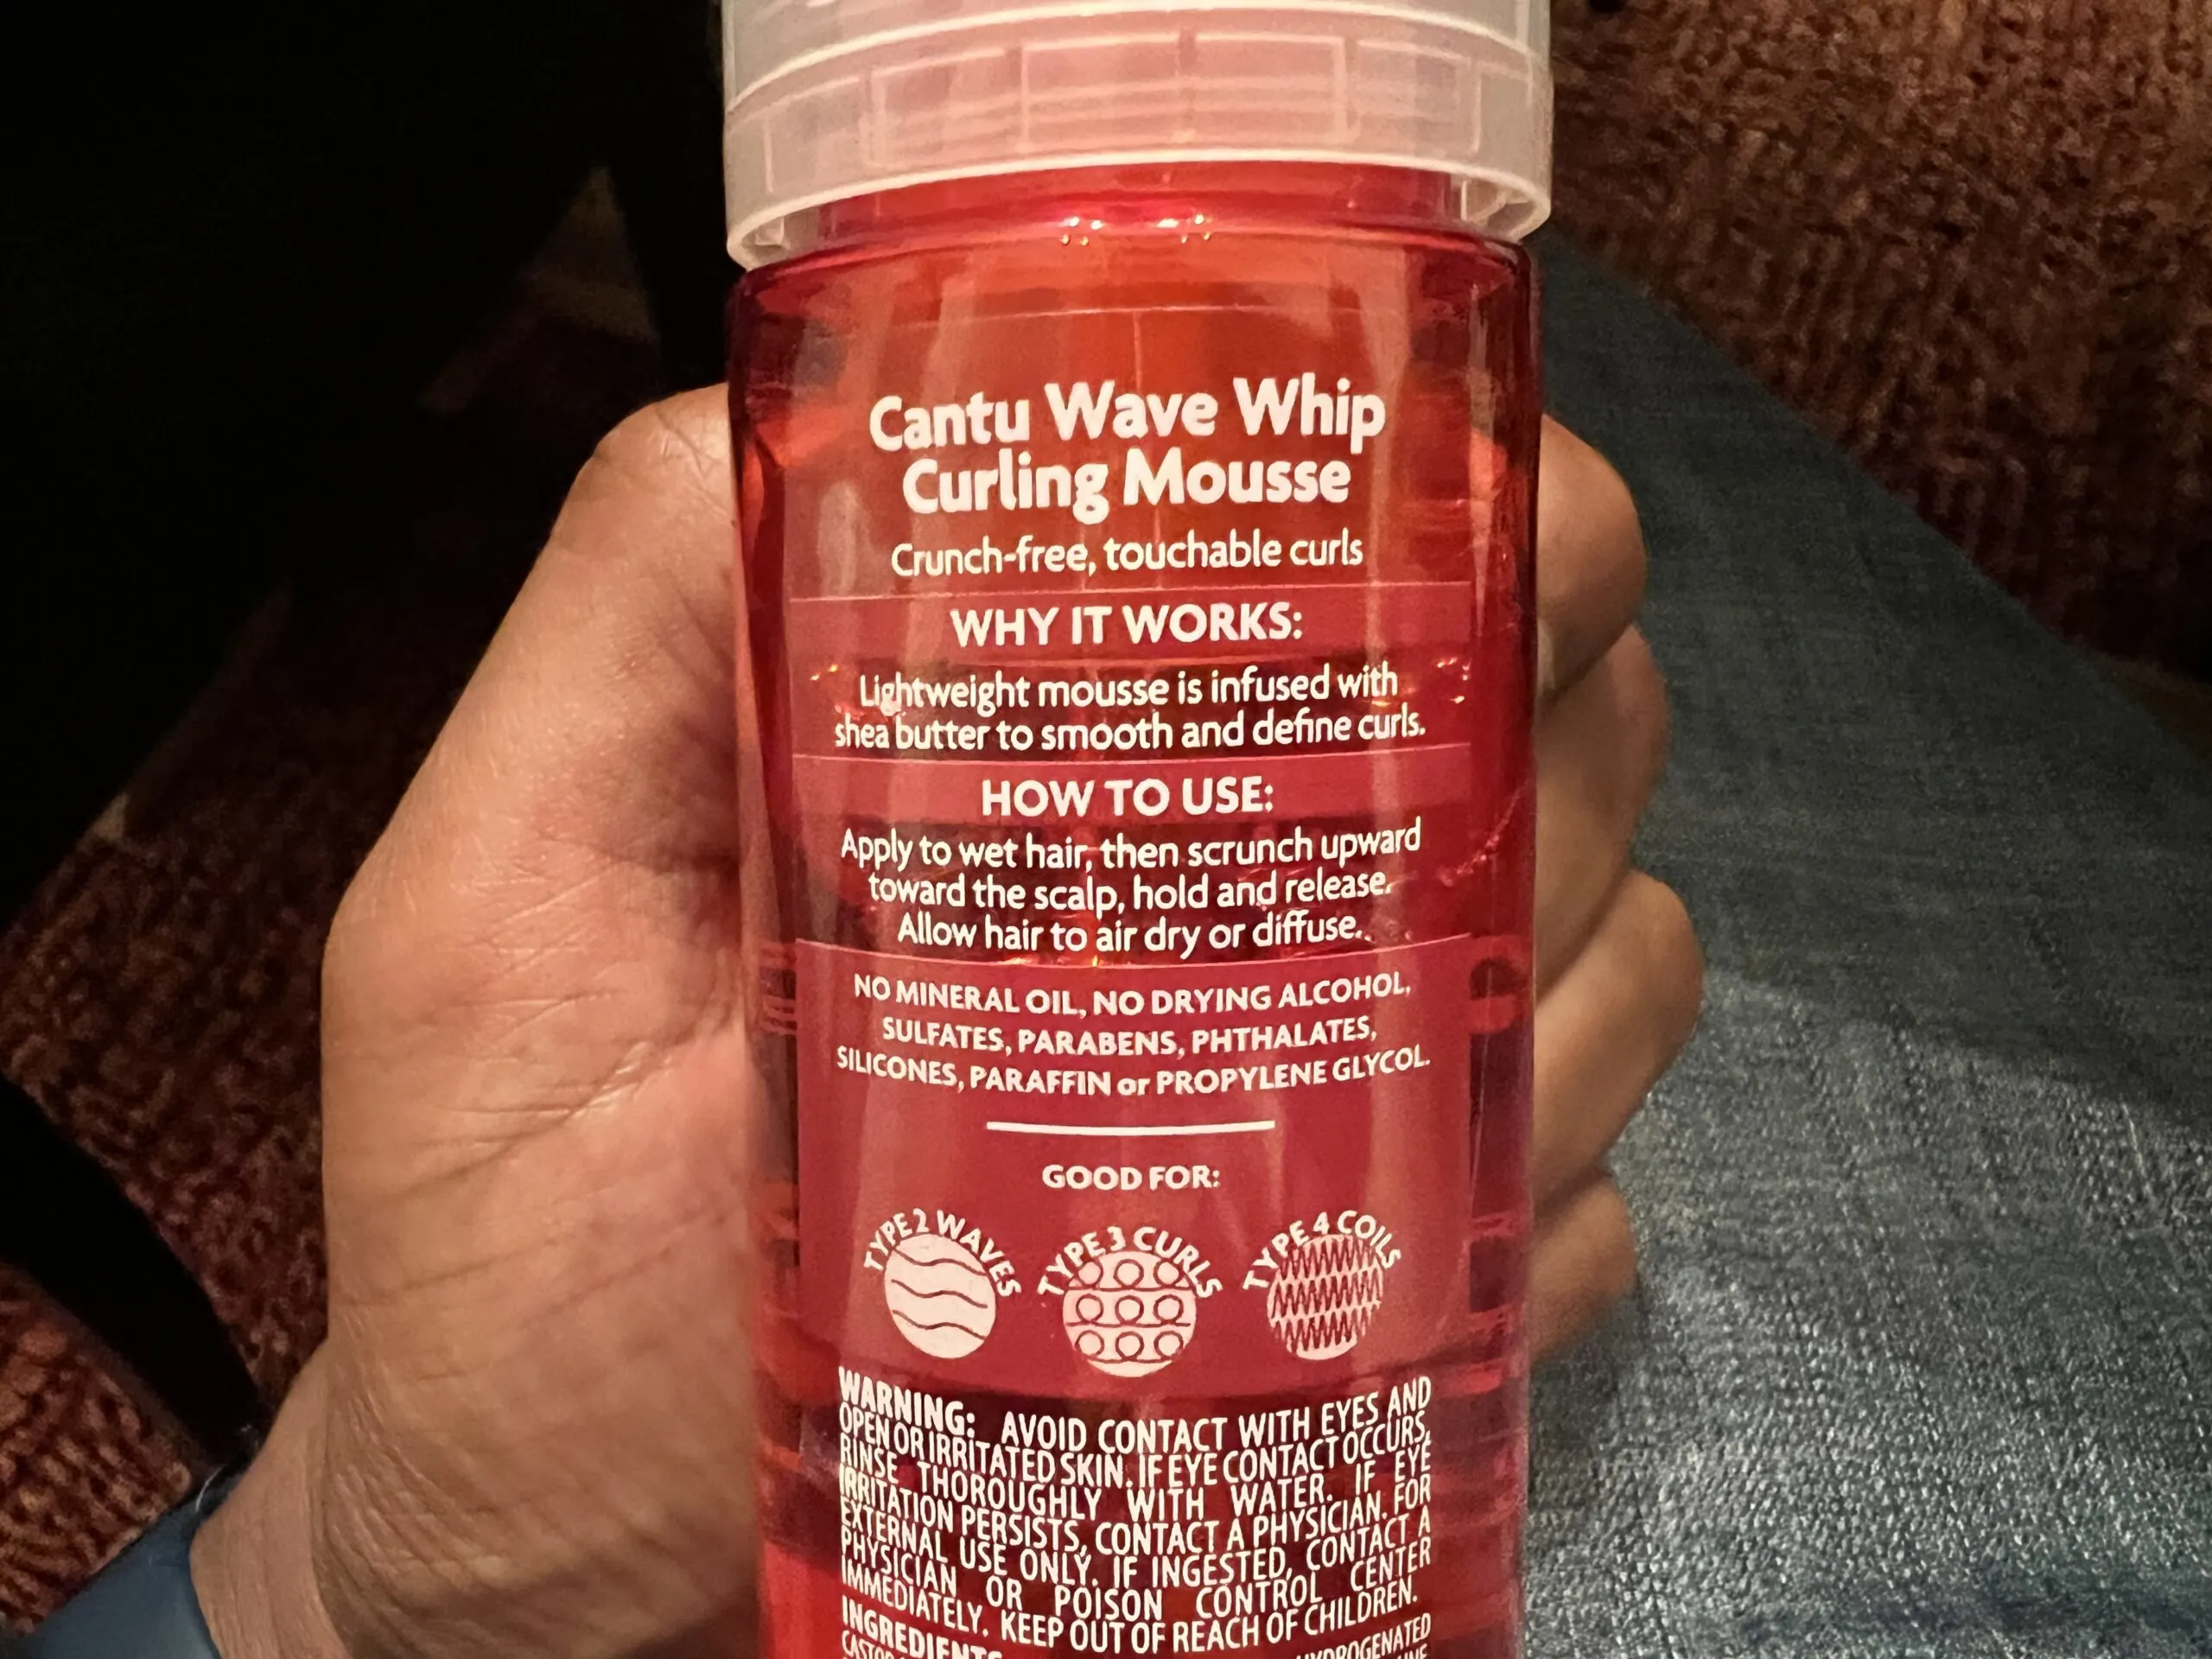 Application of Cantu Shea Butter Wave Whip Curling Mousse, showcasing its lightweight formula for curl definition.